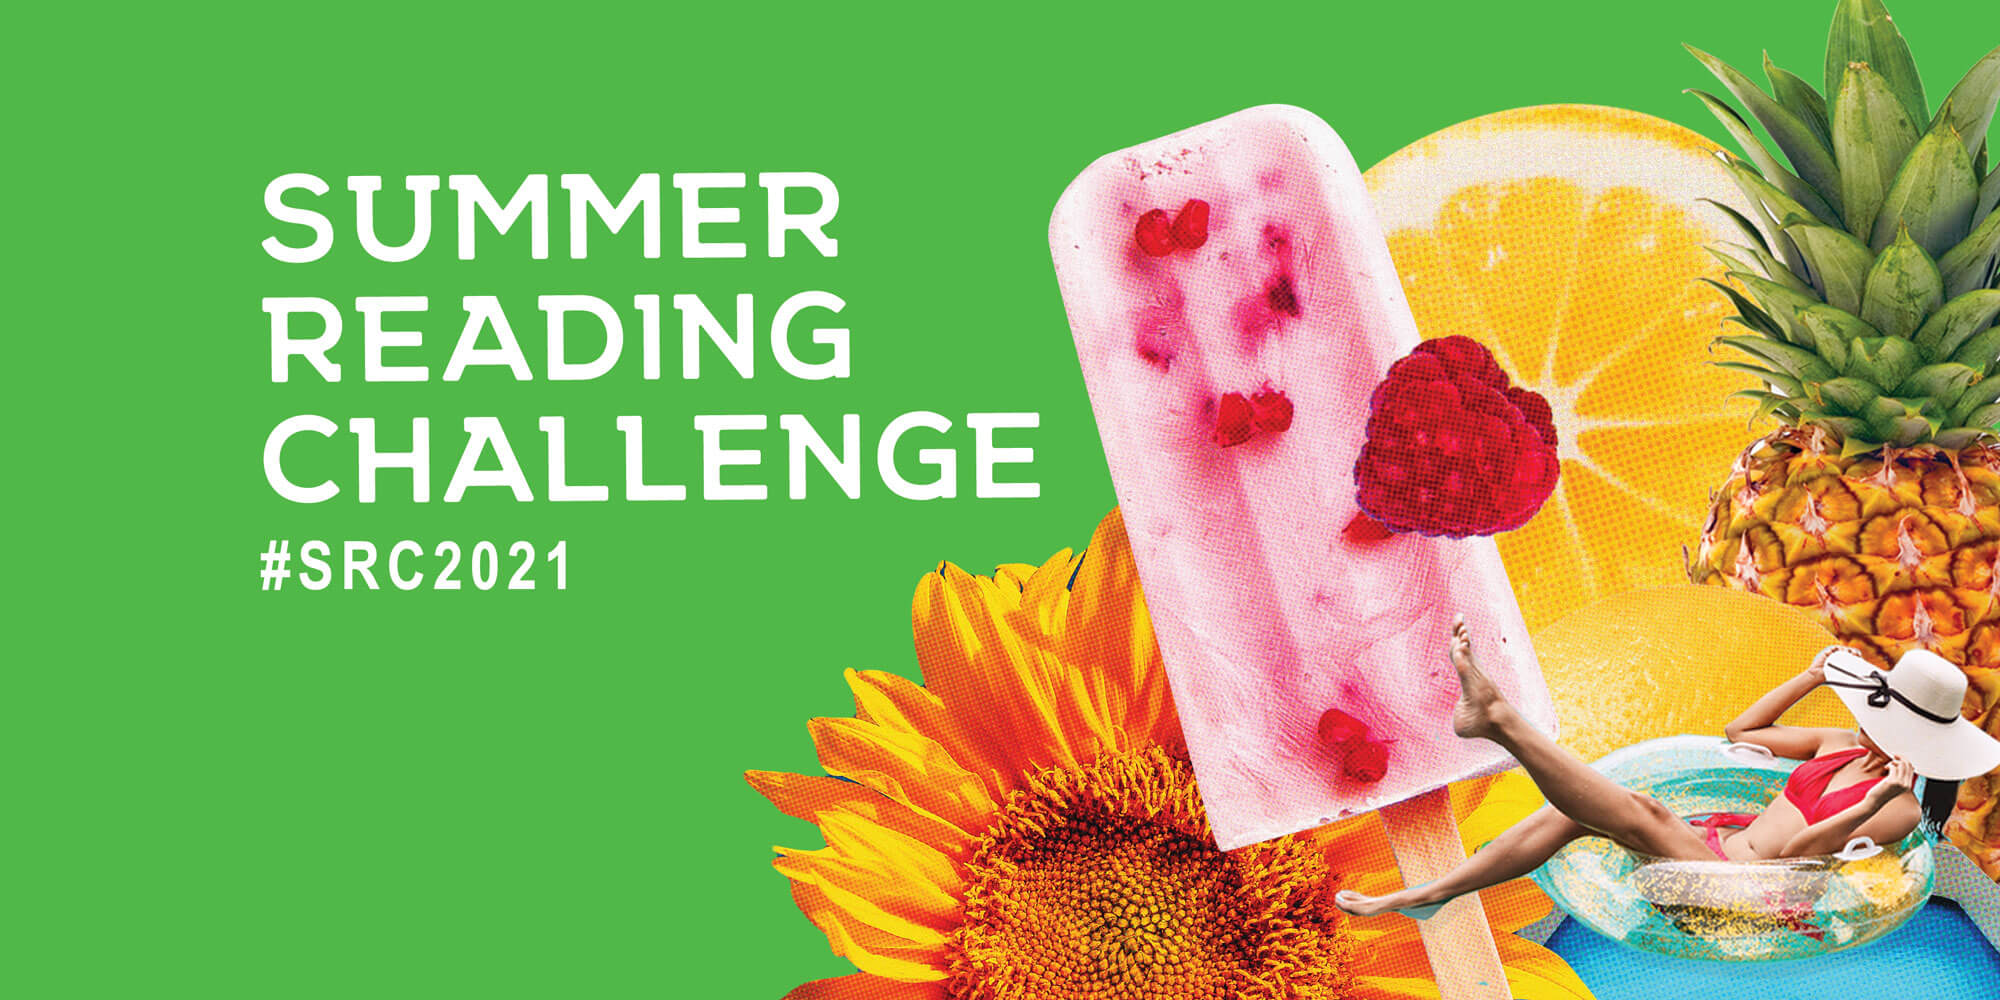 BookSparks Summer Reading Challenge 2021 reaches over 20 million, teams